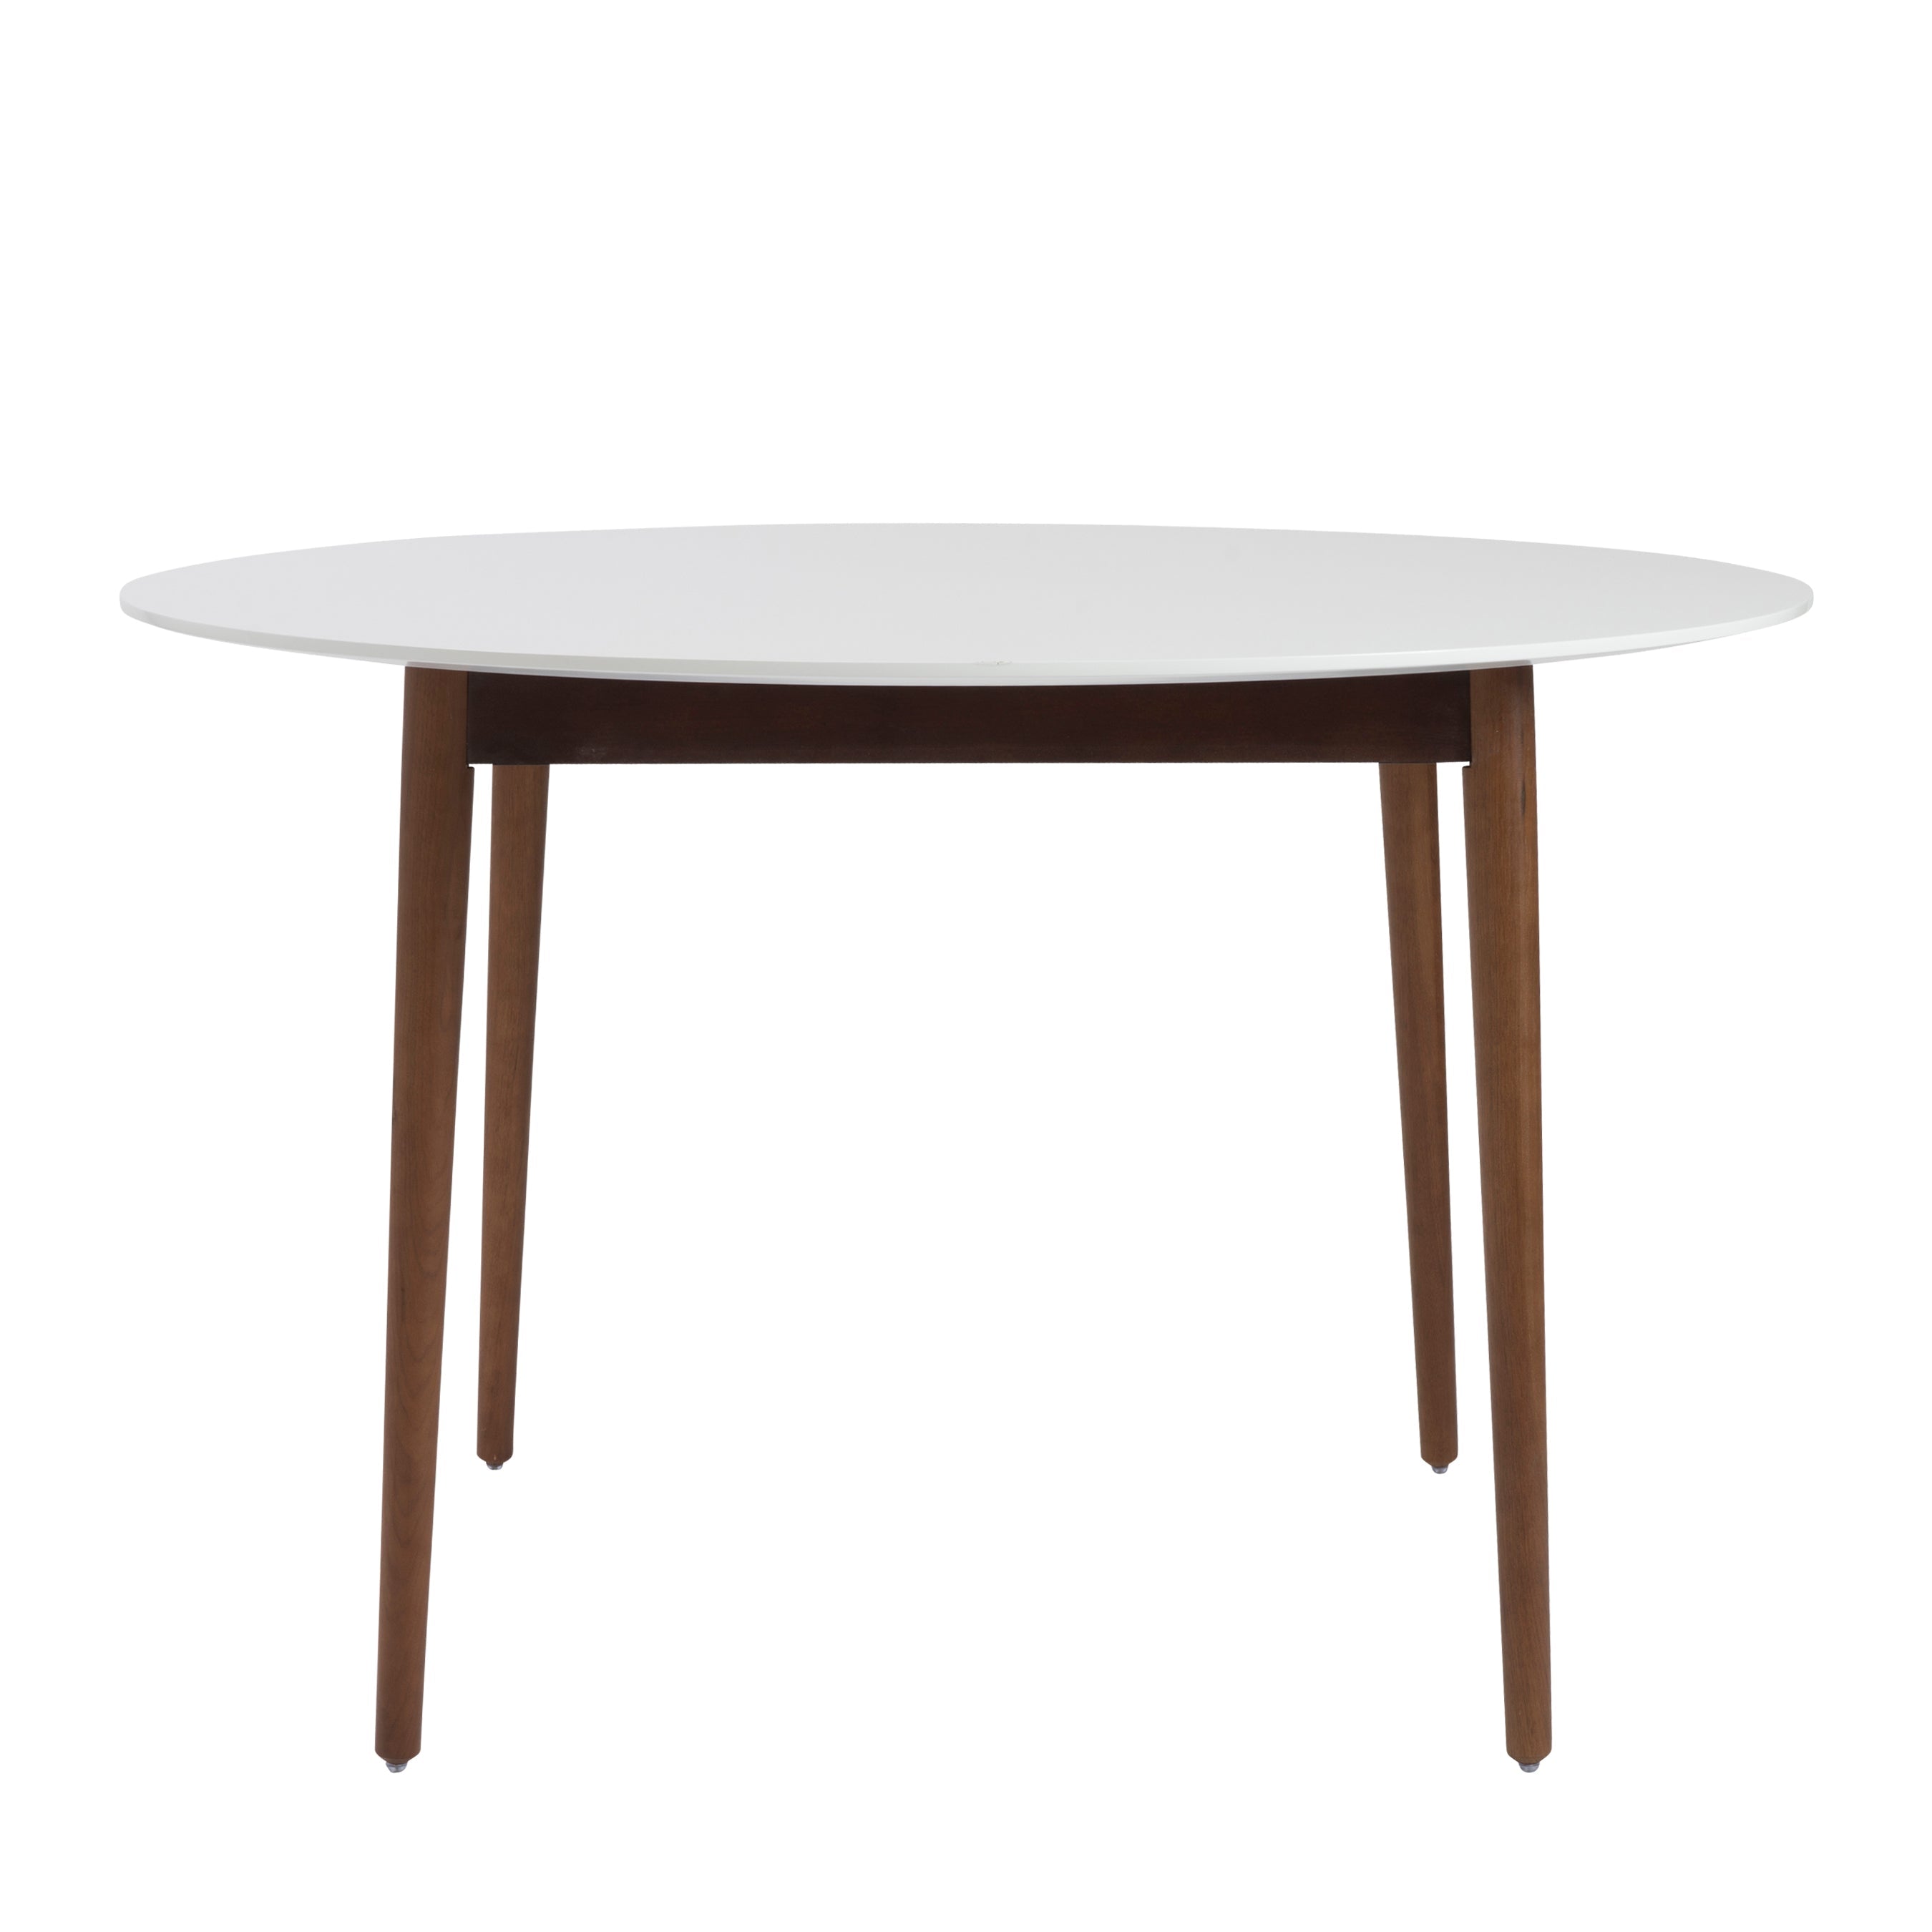 Manon Round Dining Table - What A Room